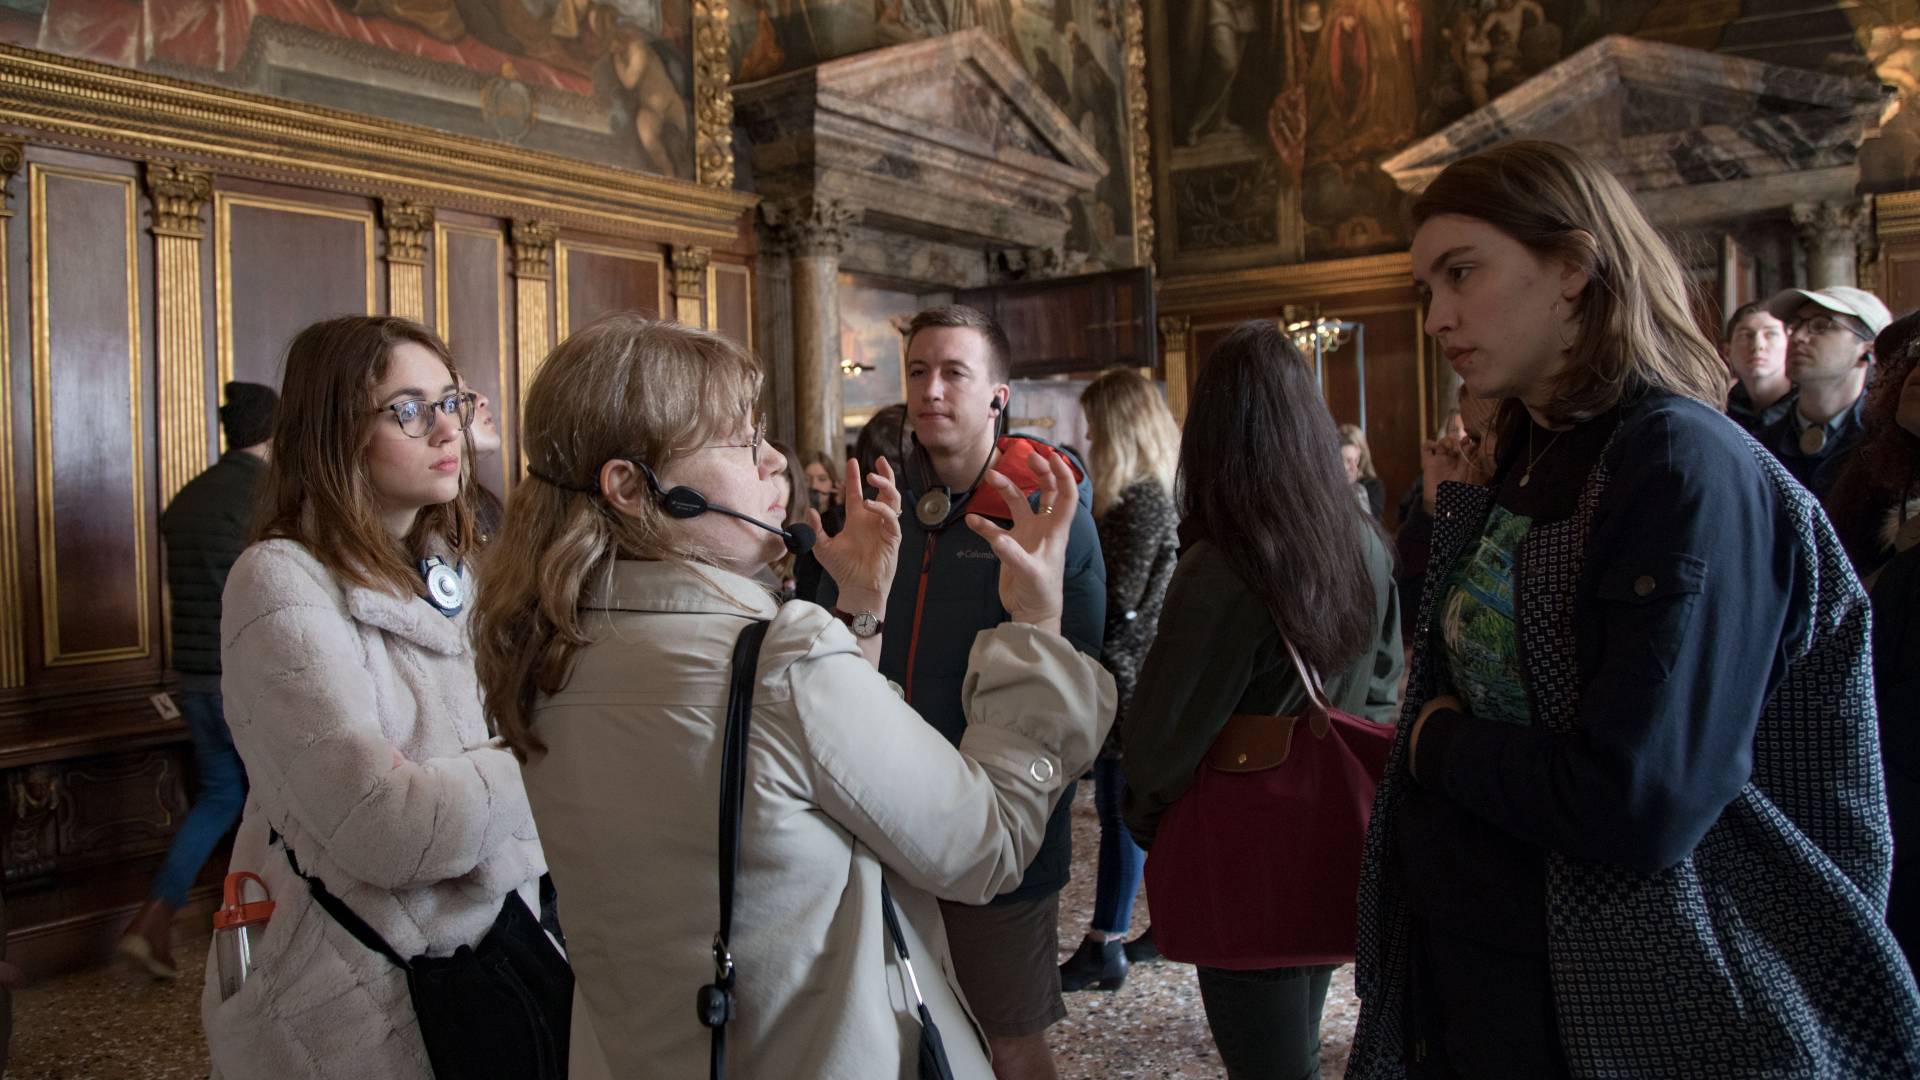 Tour guide with students inside the Doge's Palace in Venice